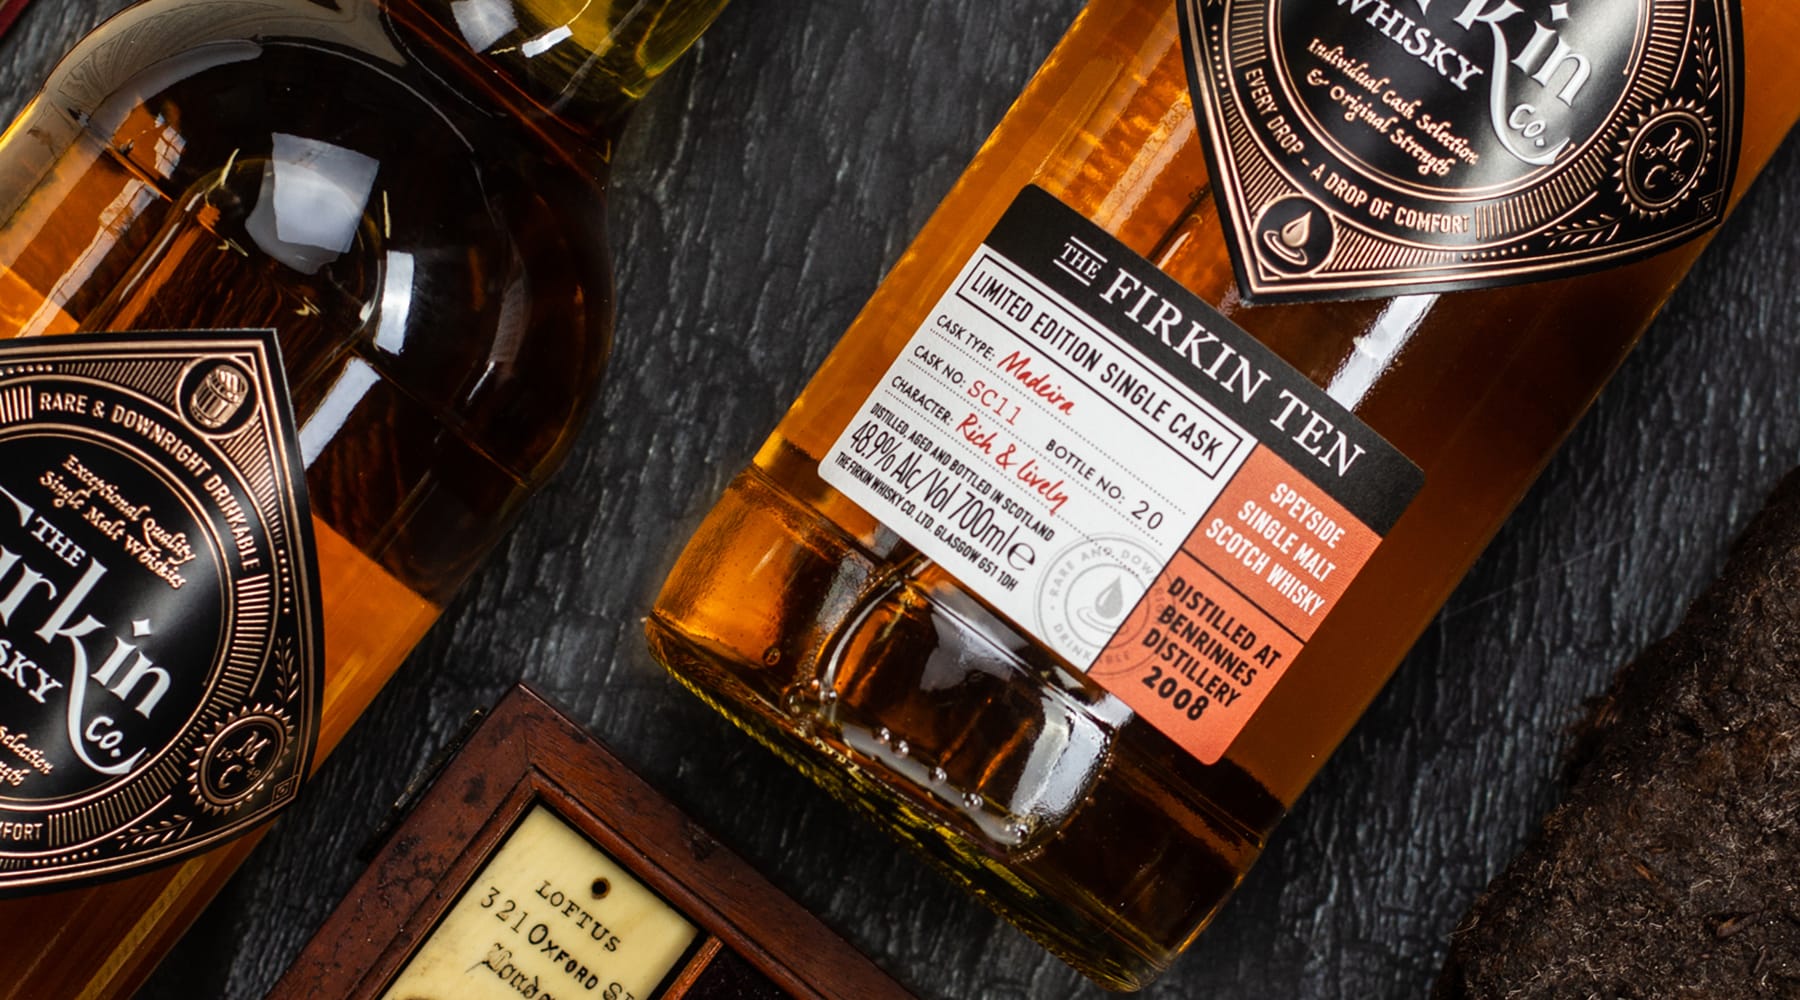 Firkin Ten, Some Awesome Speyside Whisky